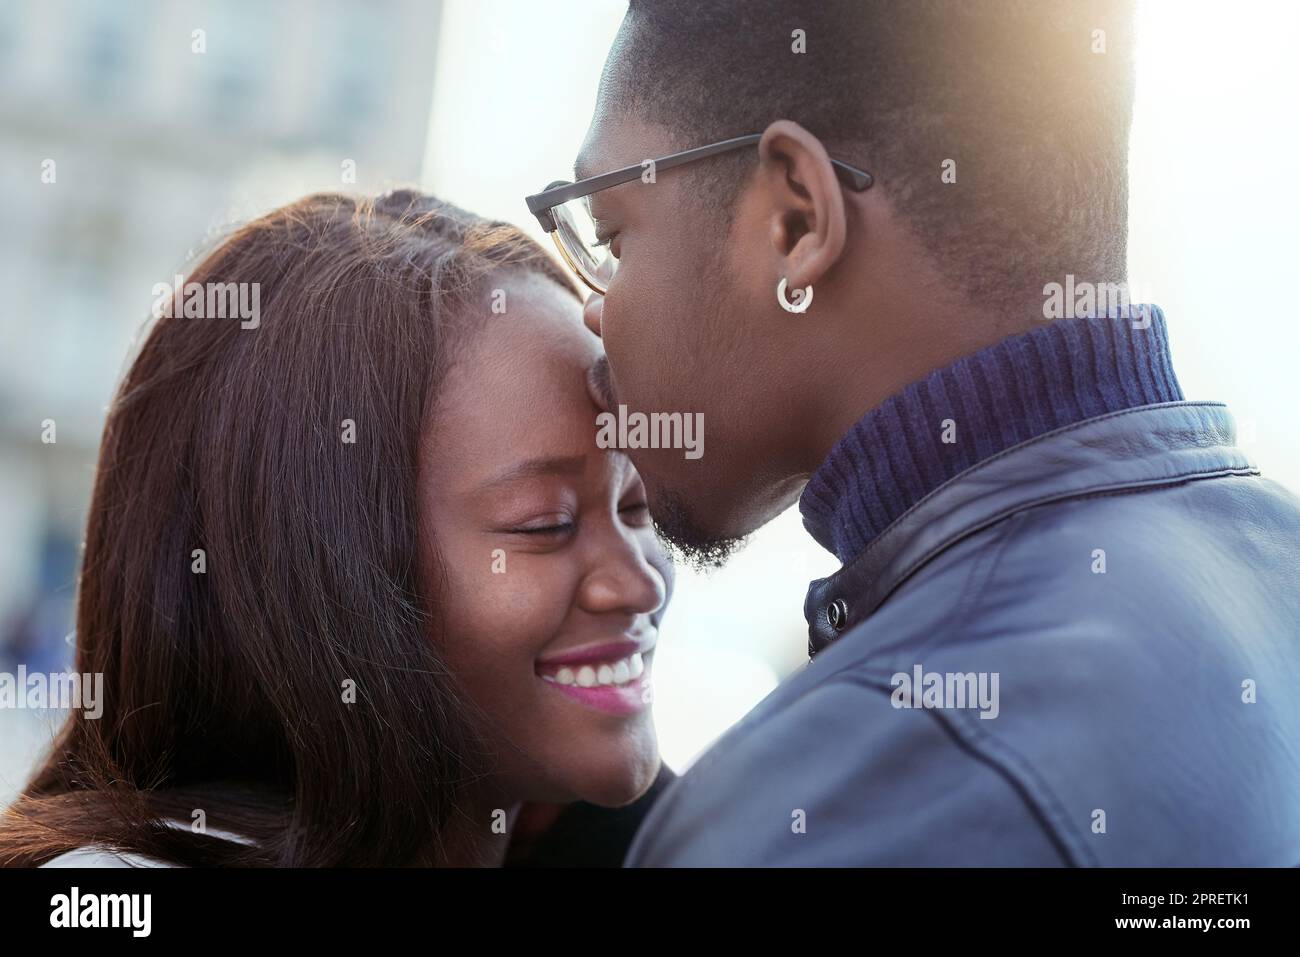 You are my whole world. an affectionate young couple bonding together outdoors. Stock Photo